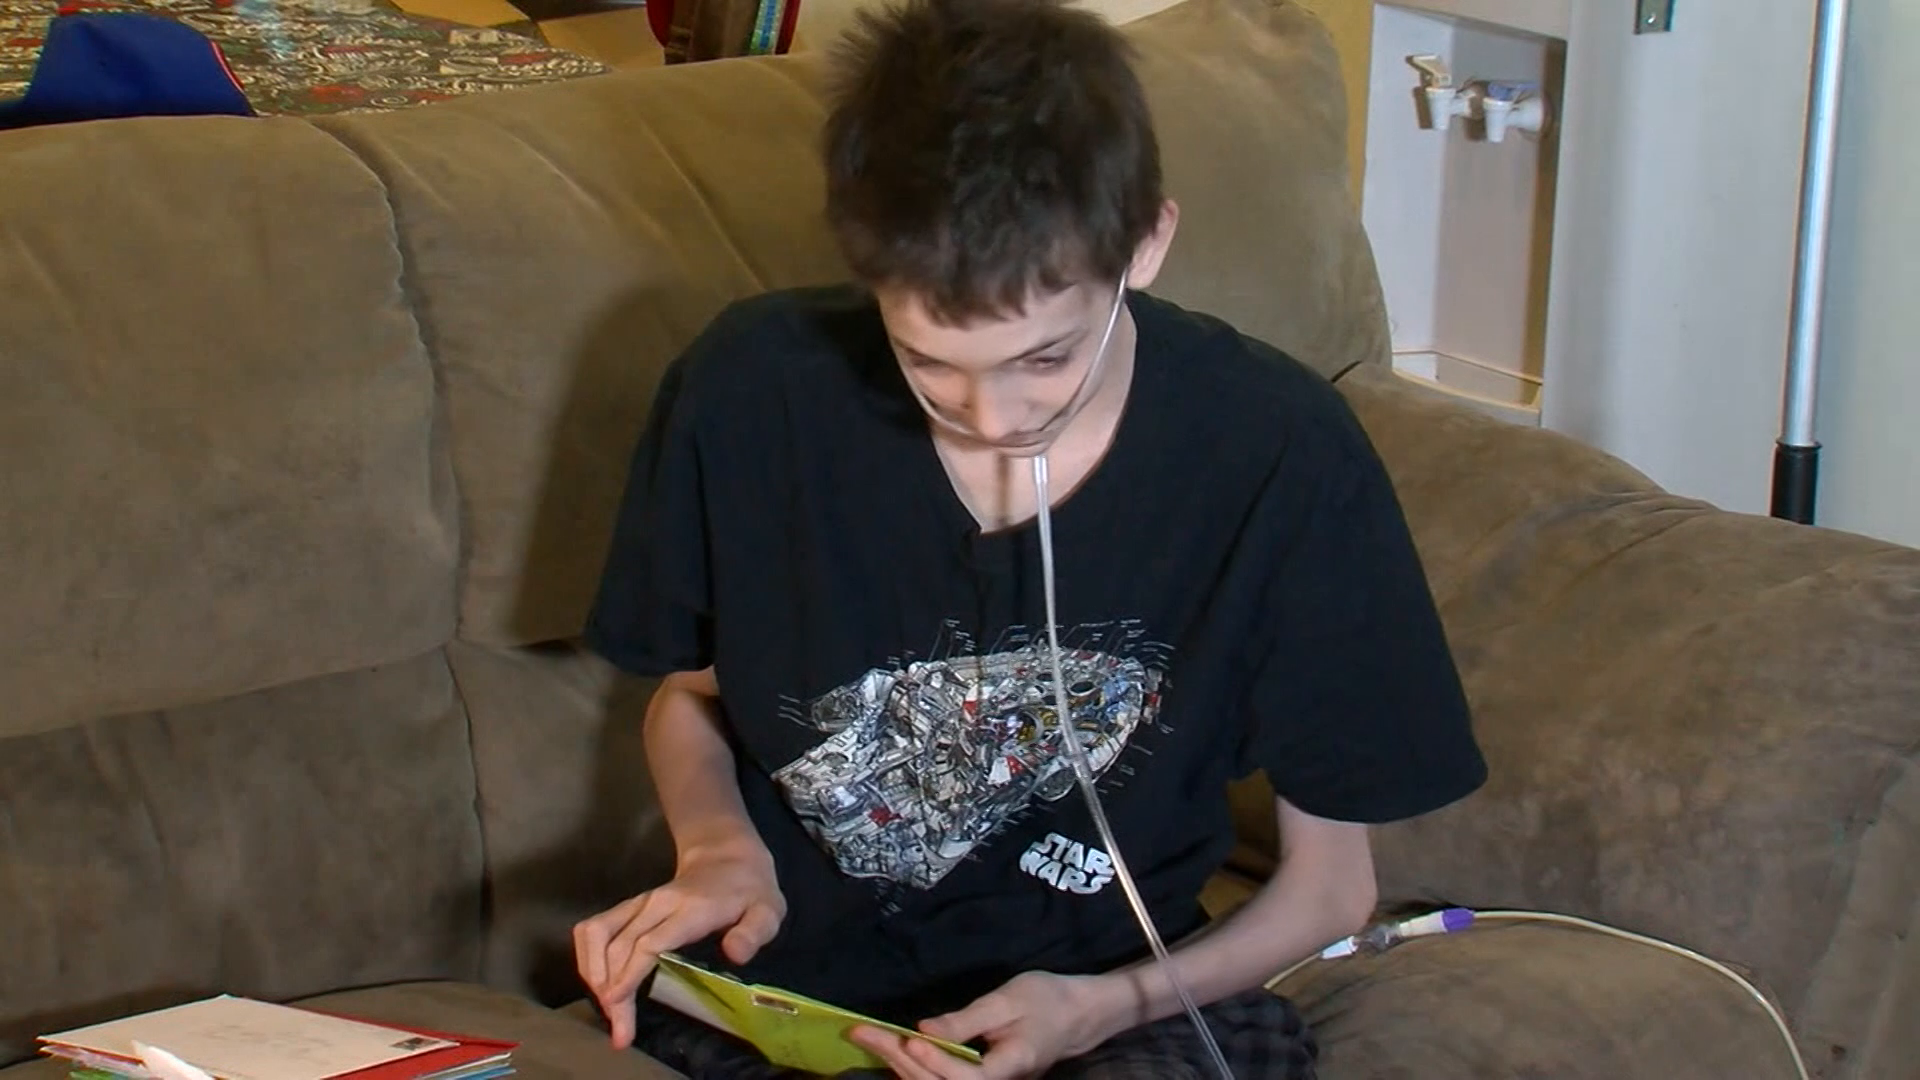 How you can make this terminally ill boy's birthday wish come true